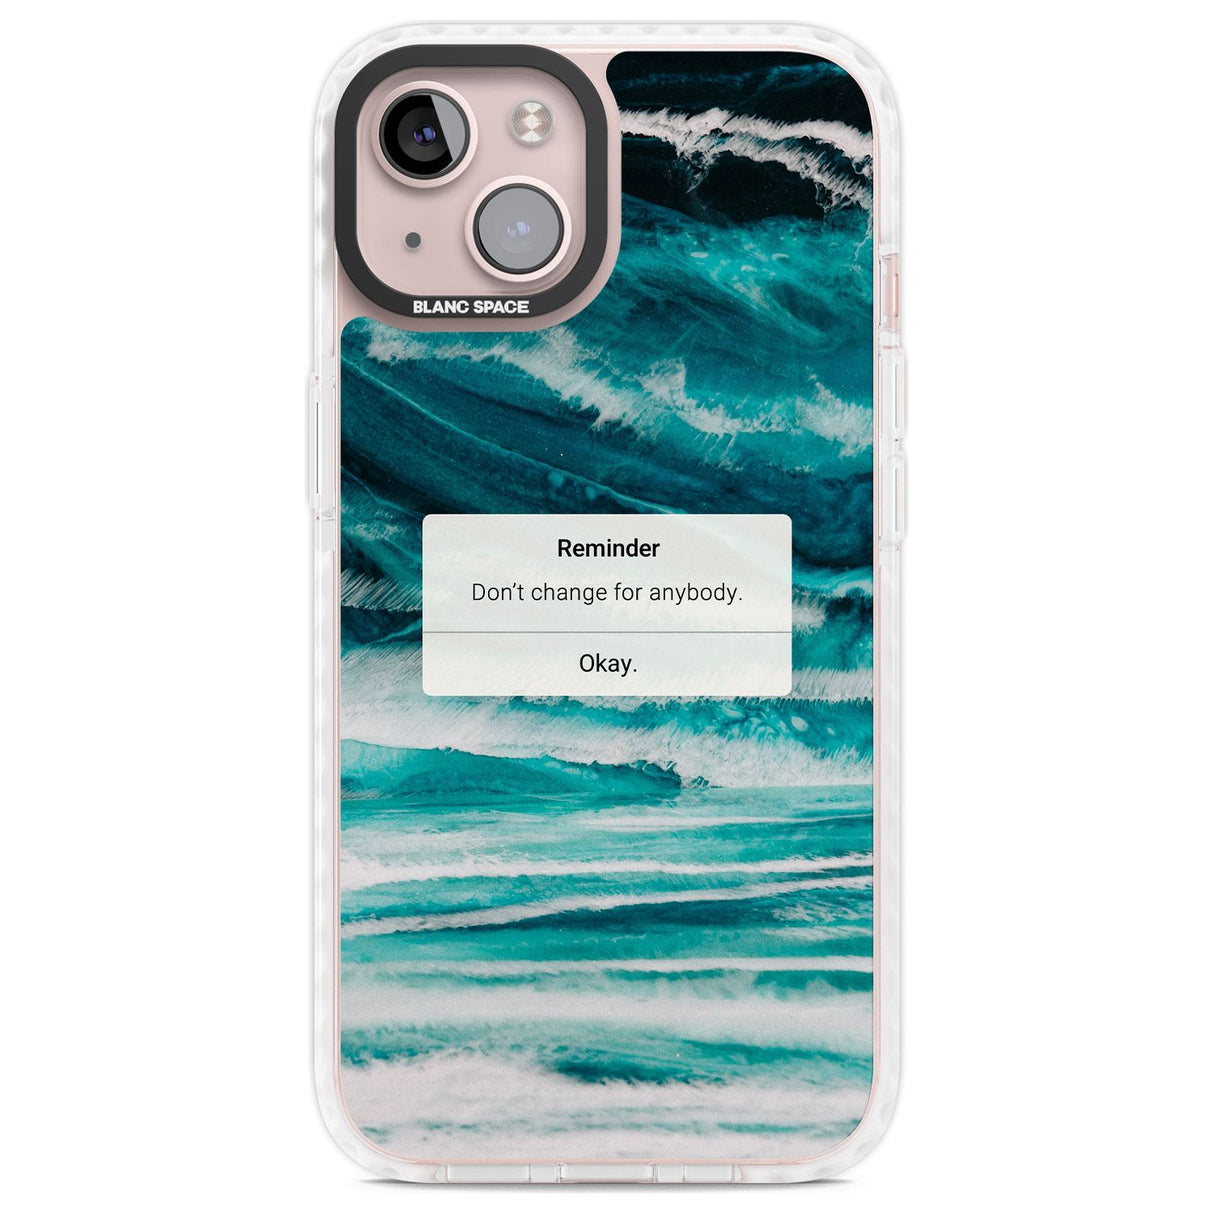 "Don't Change" iPhone Reminder Phone Case iPhone 13 / Impact Case,iPhone 14 / Impact Case,iPhone 15 Plus / Impact Case,iPhone 15 / Impact Case Blanc Space